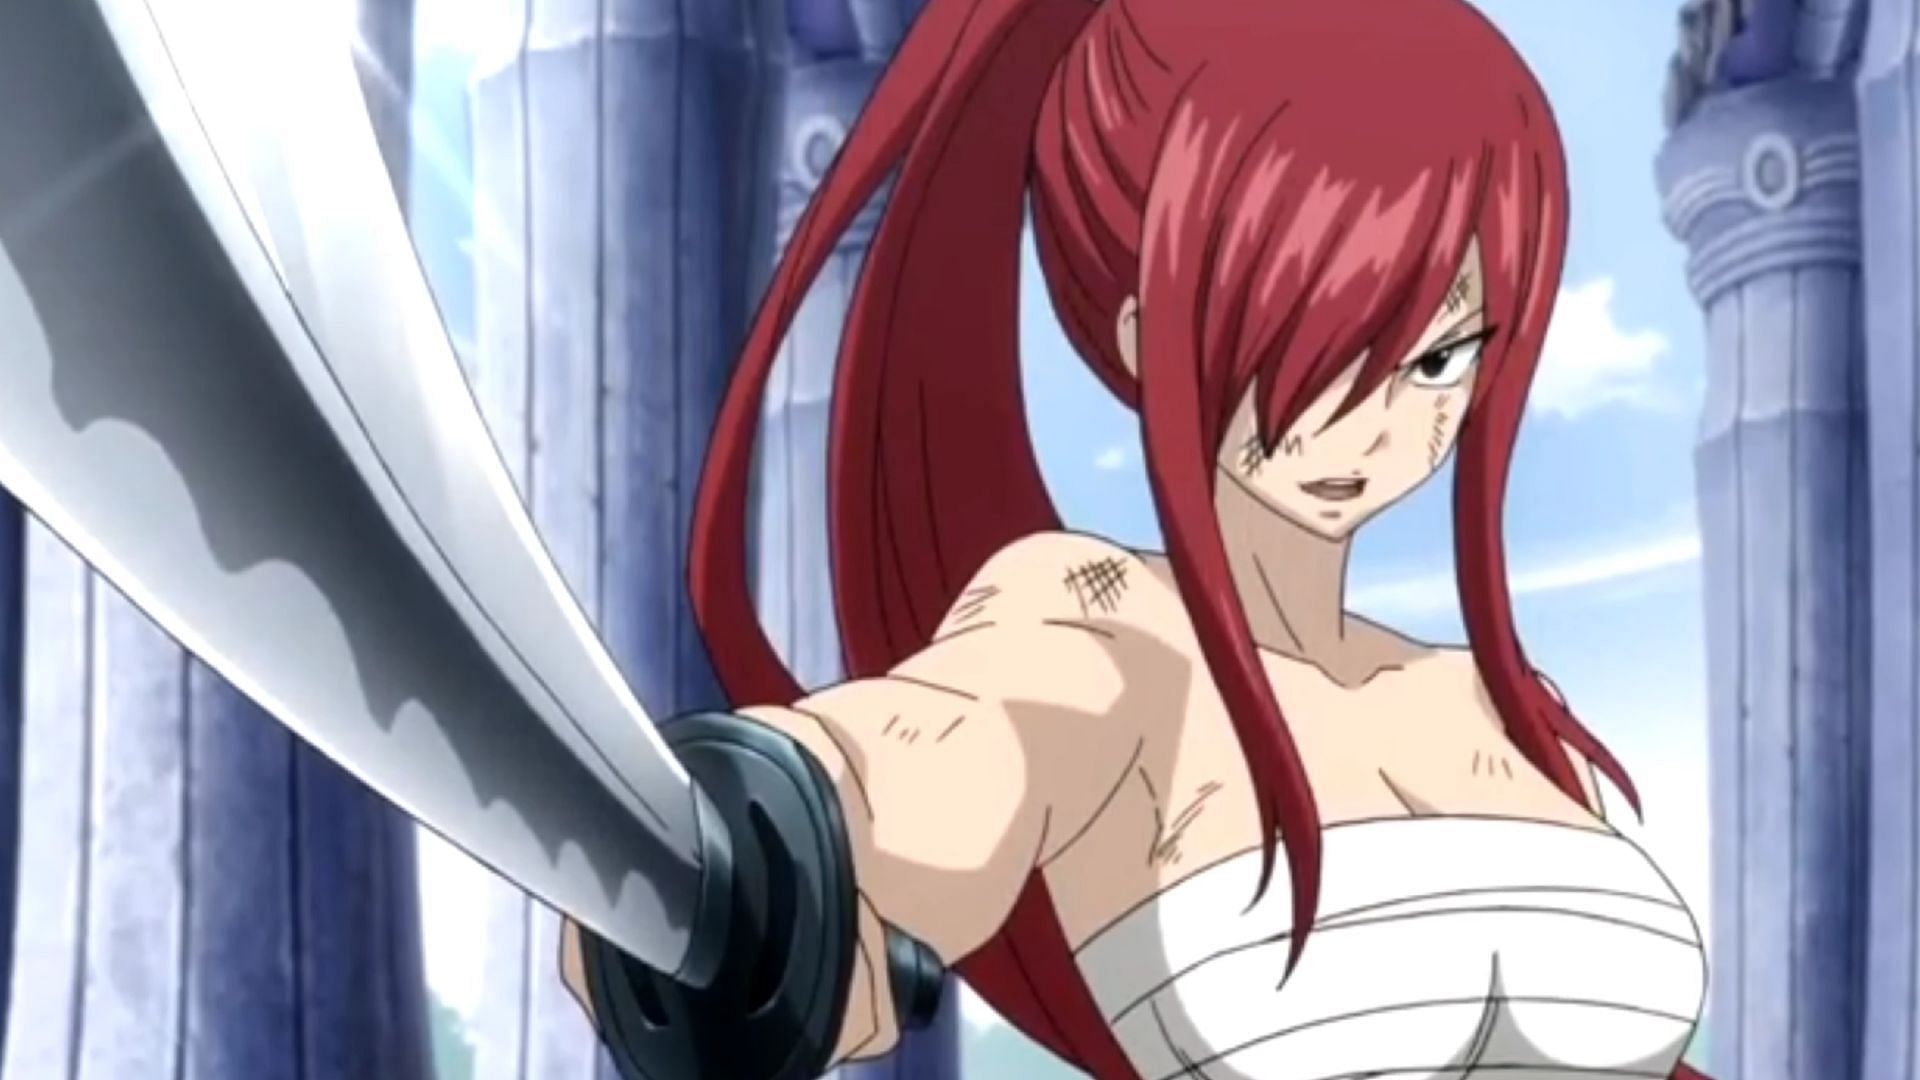 Erza (Image via A-1 Pictures/Satelight)